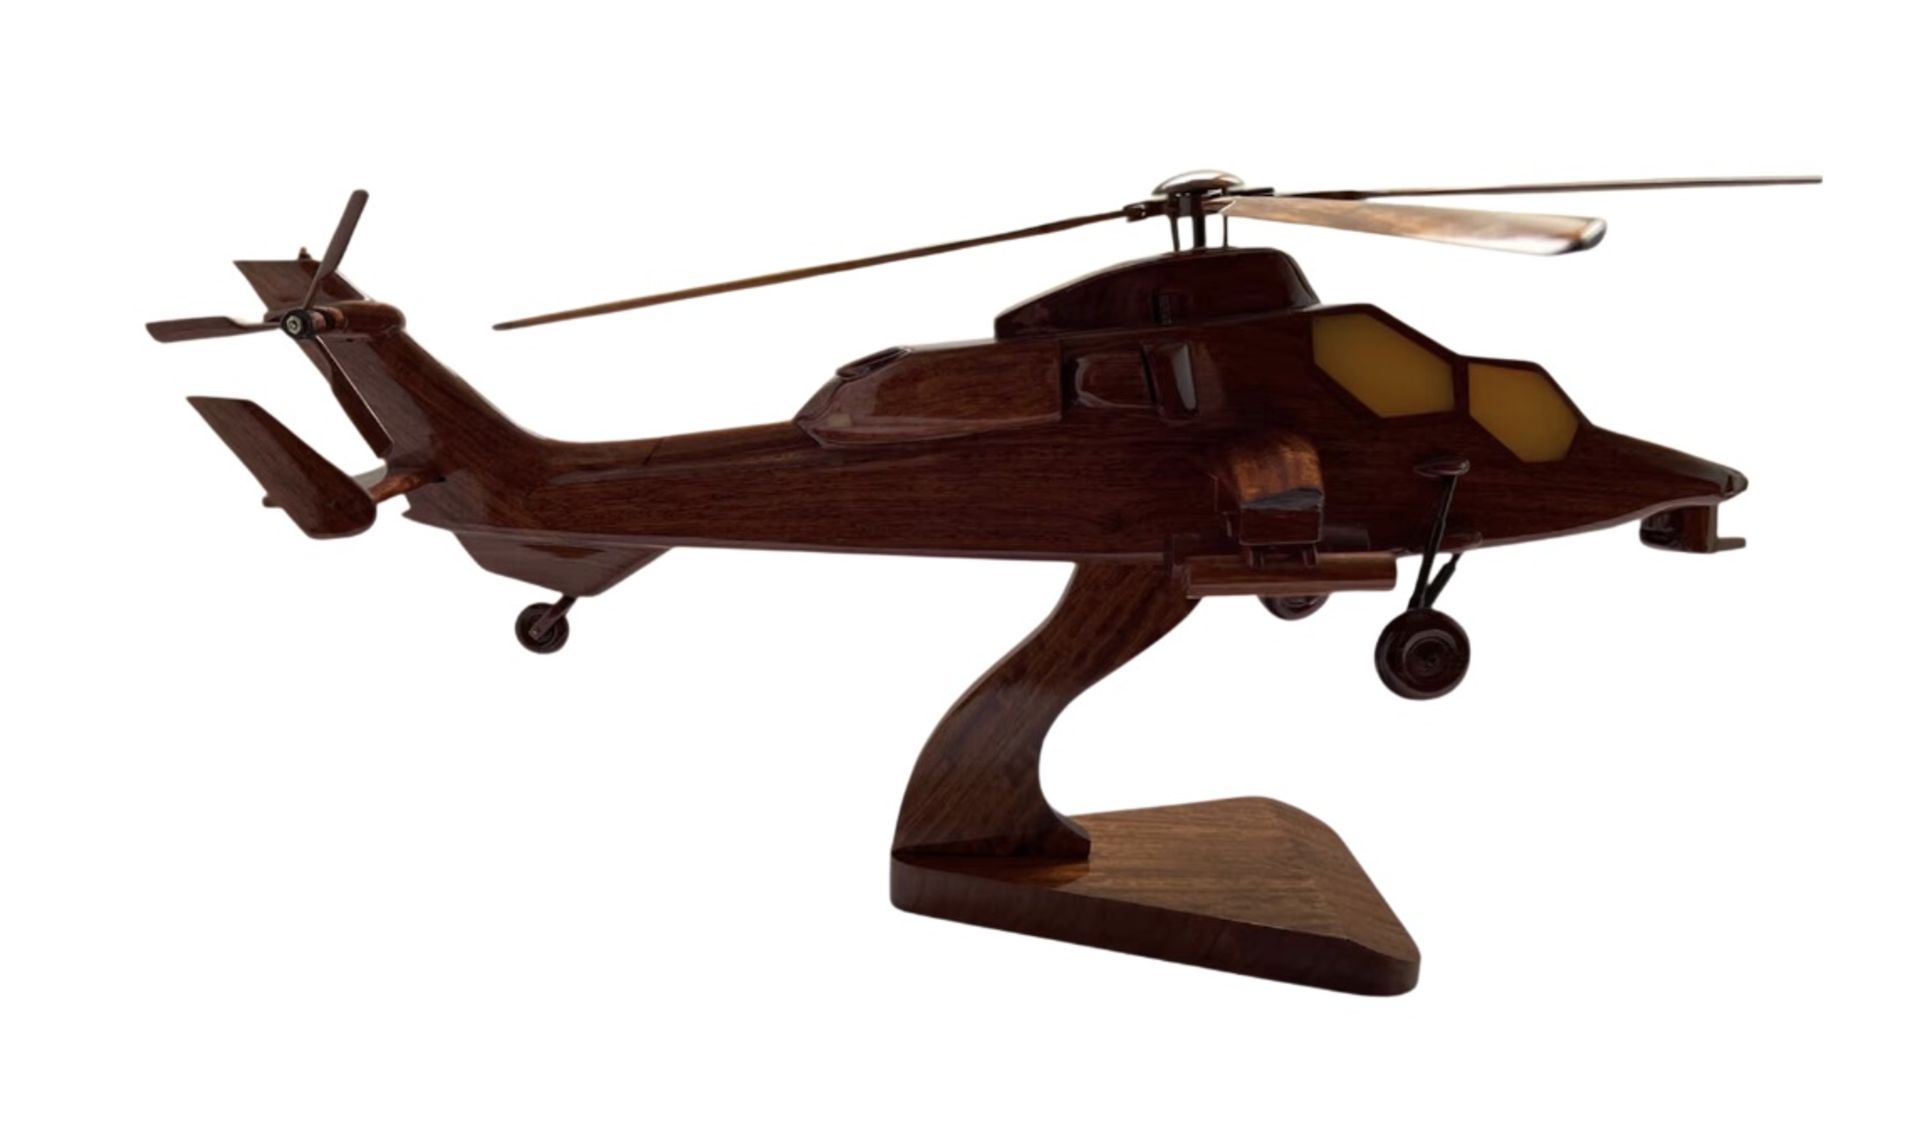 Eurocopter / Airbus Tiger Wooden Scale Desk Display Model - Image 6 of 7